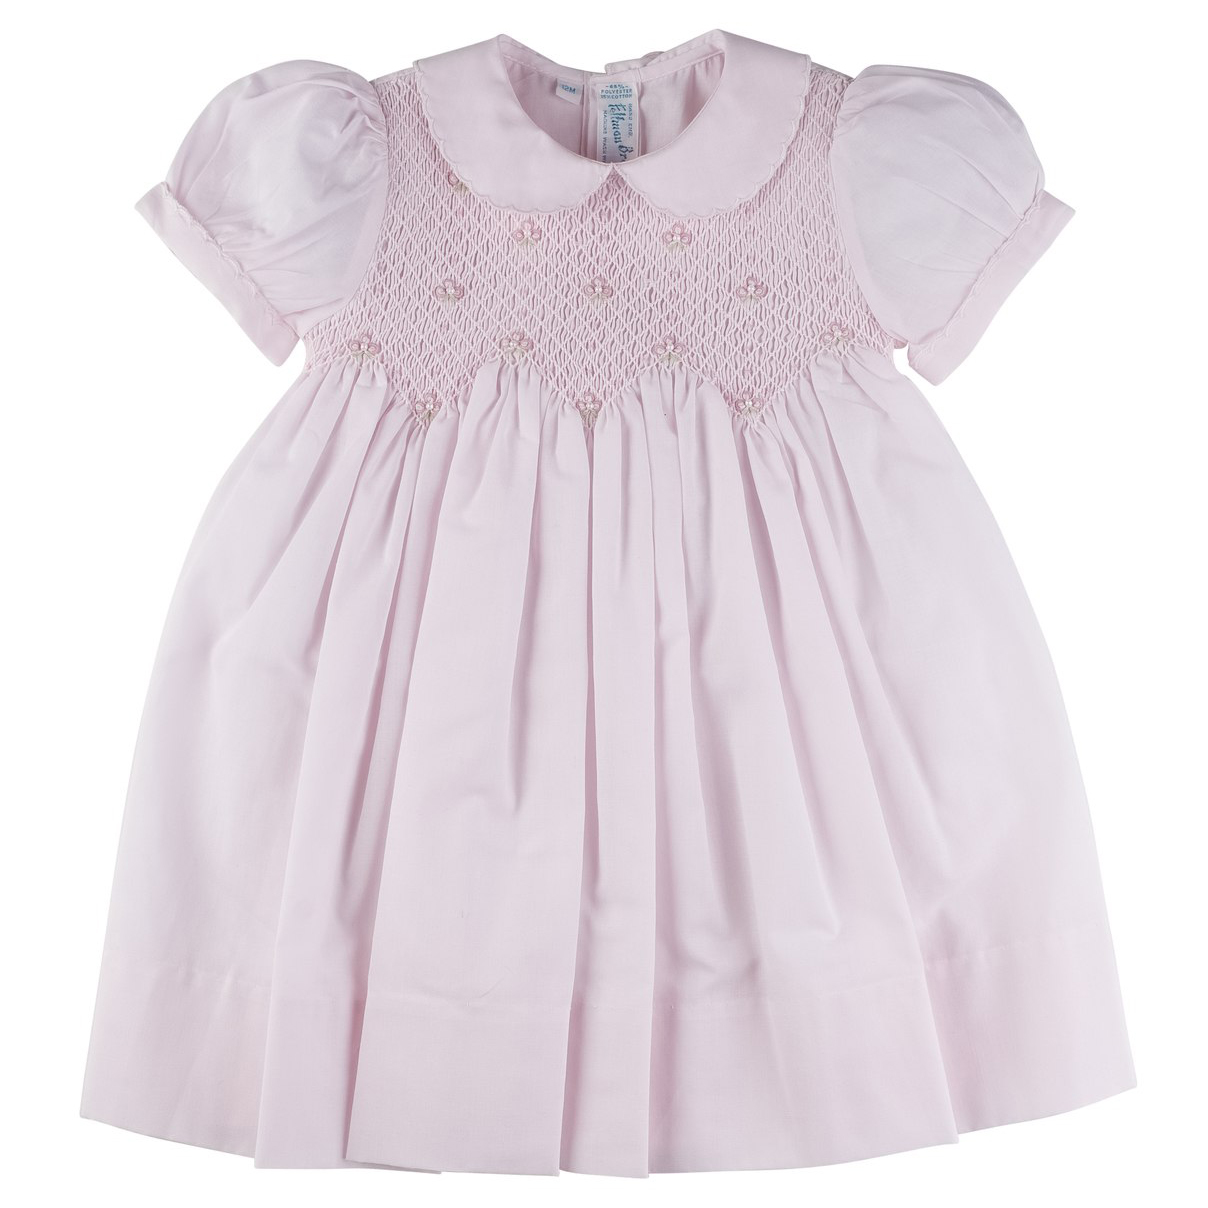 Baby Dresses | Baby Girl Dresses For Weddings & First Birthday Outfits – A  Little Lacey